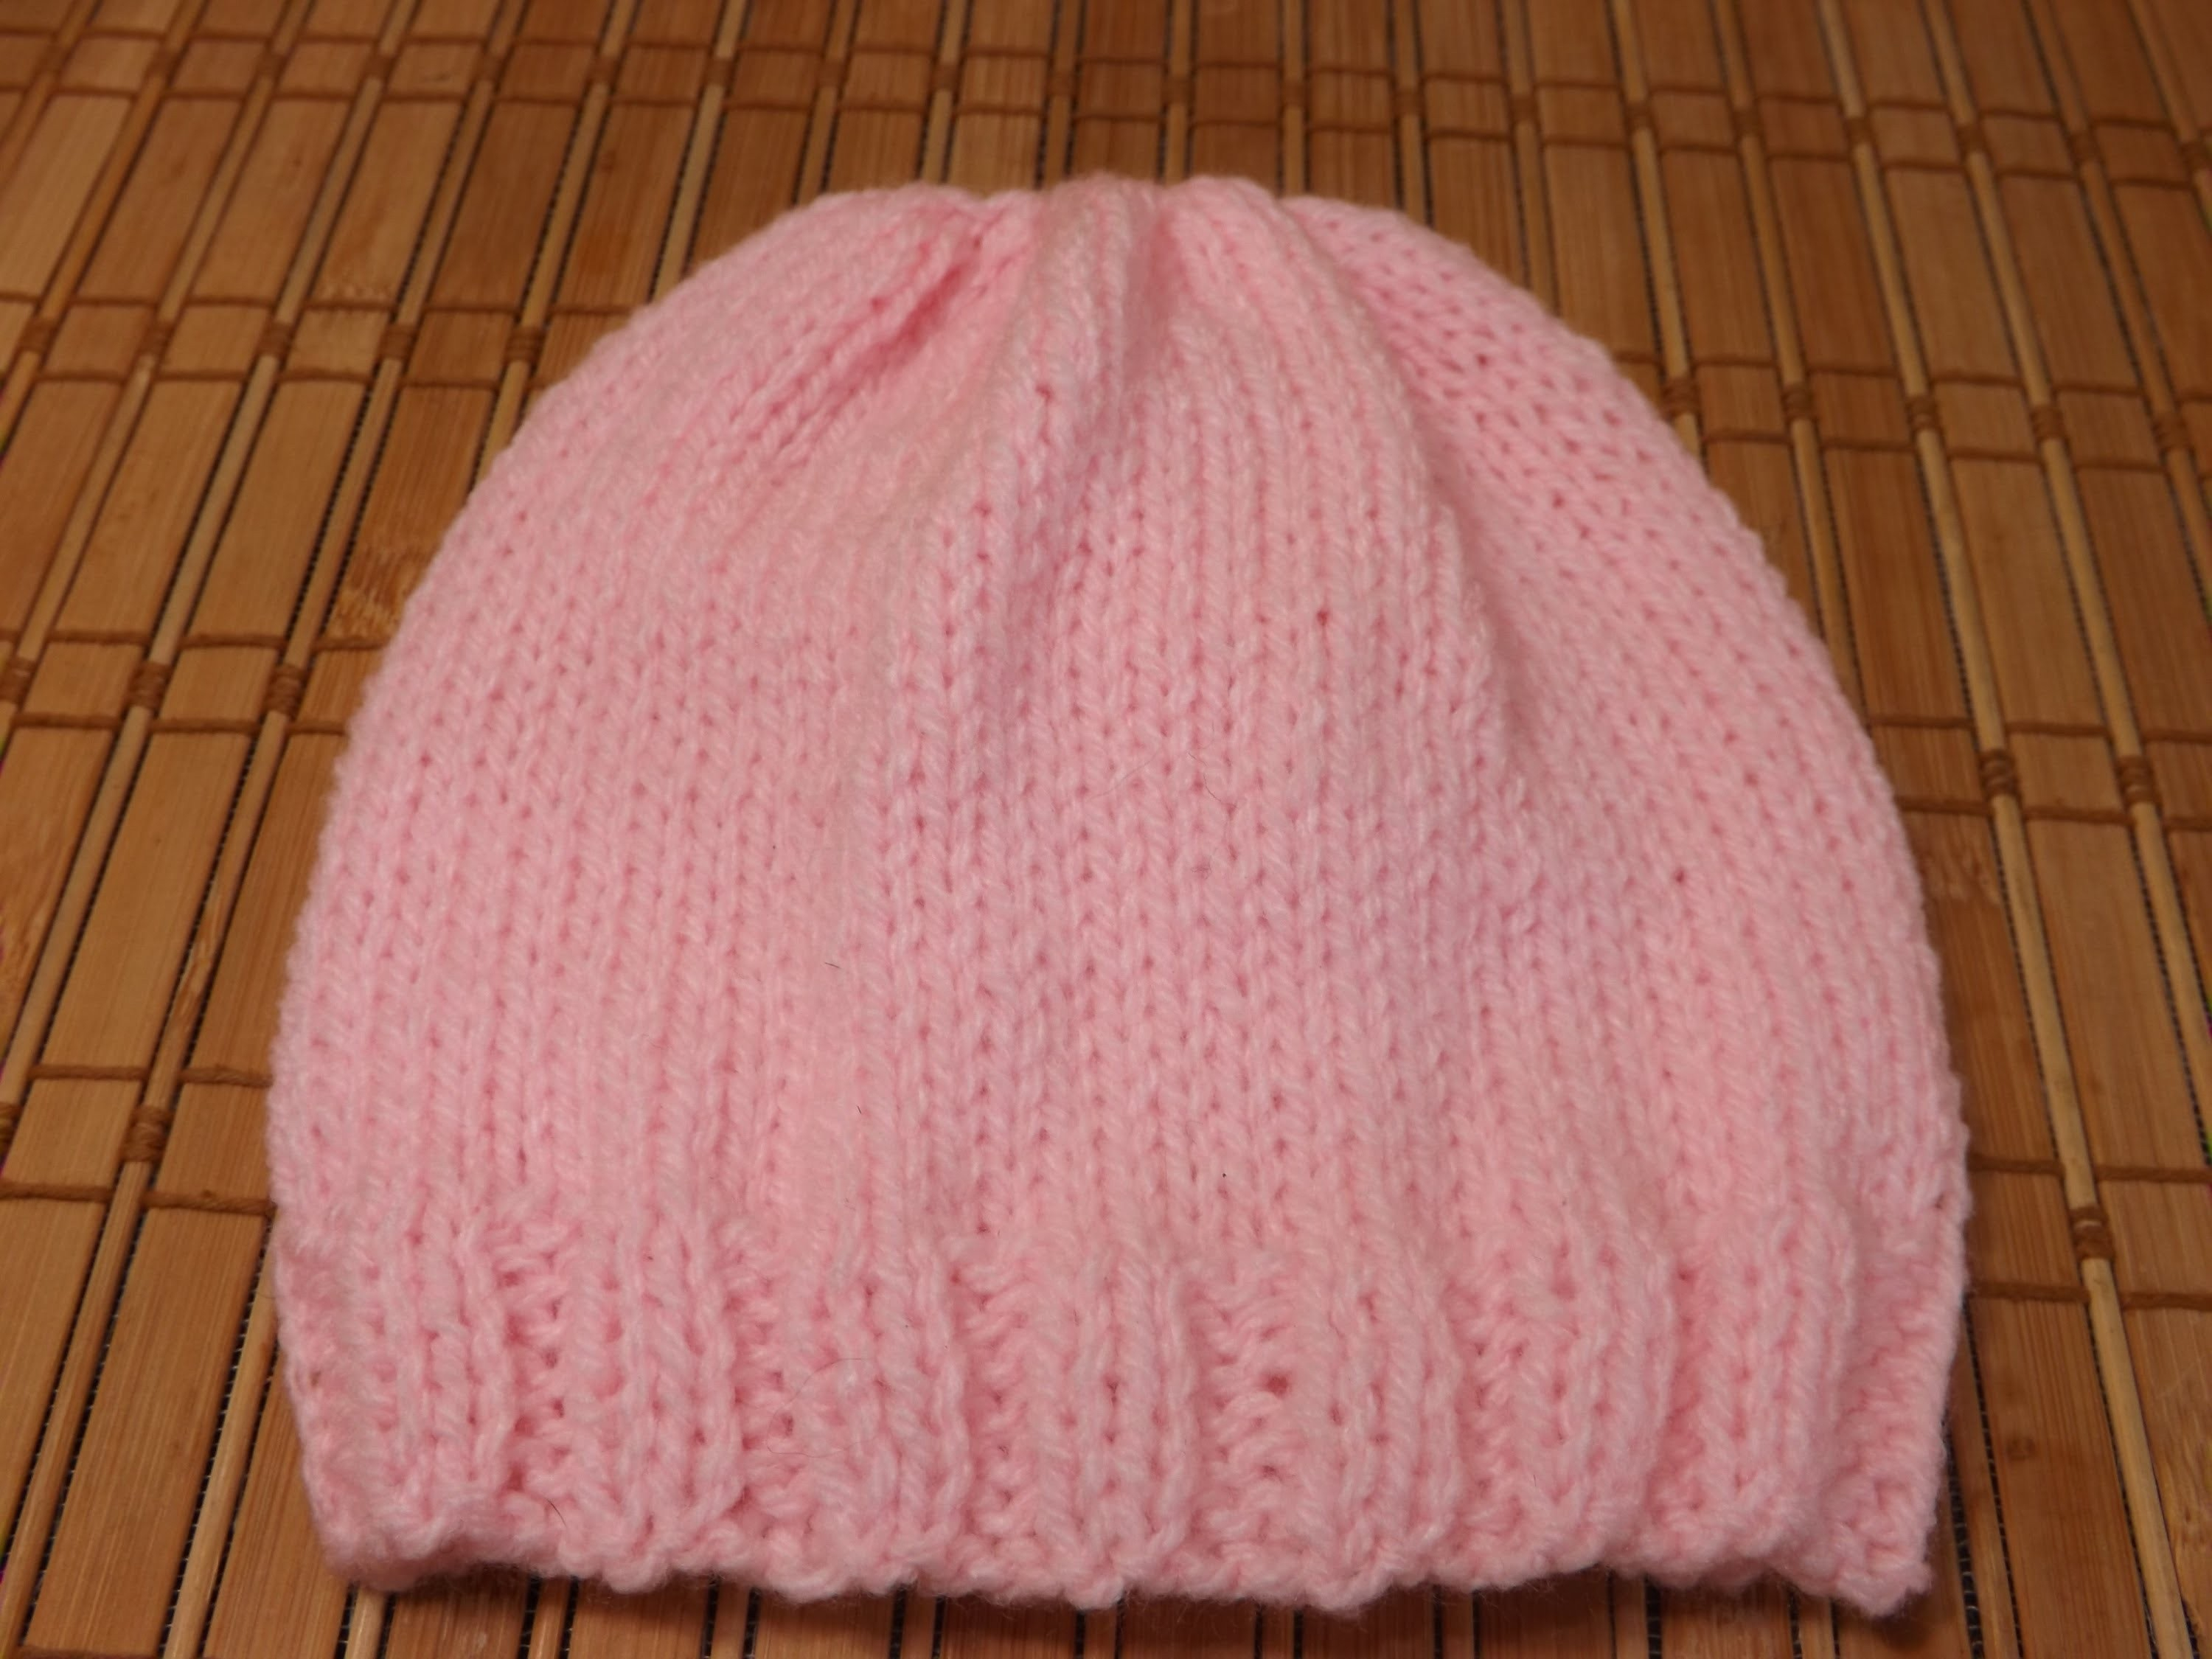 Easy Crochet Baby Hat Pattern Easy Crochet Ba Hat Patterns For Beginners Inspirational How To